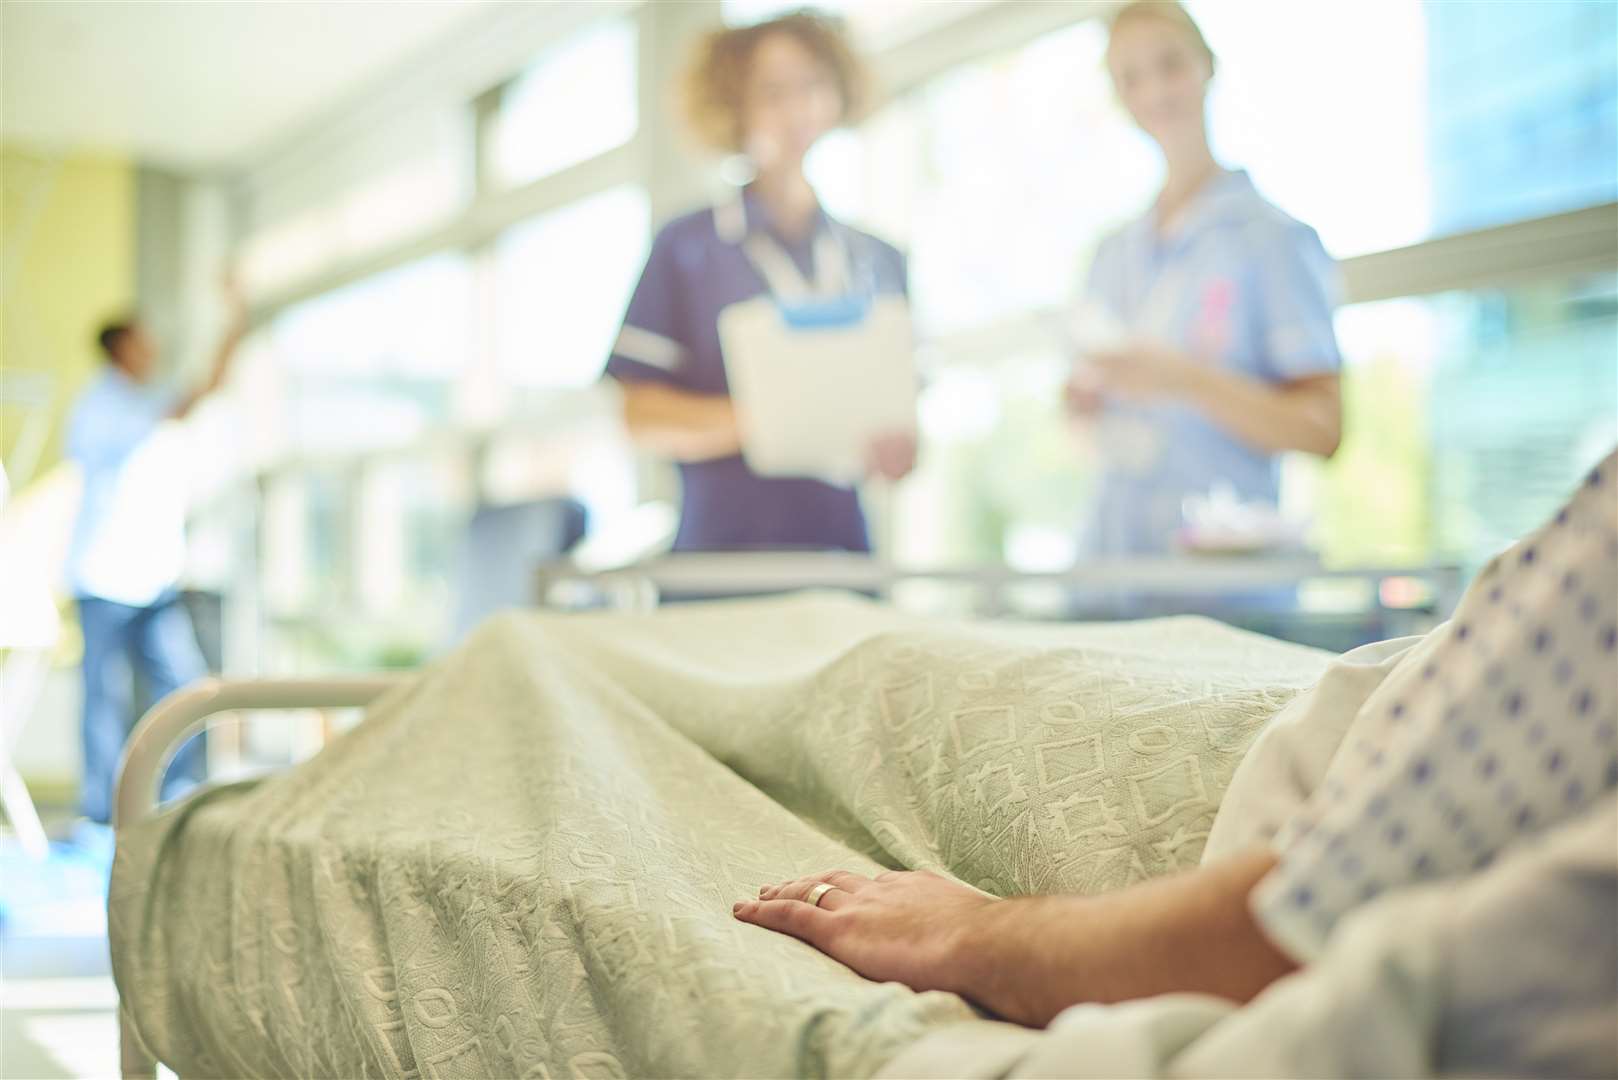 The RCN says a recent poll suggests two thirds of people in England would back nurses going on strike. Image: iStock.